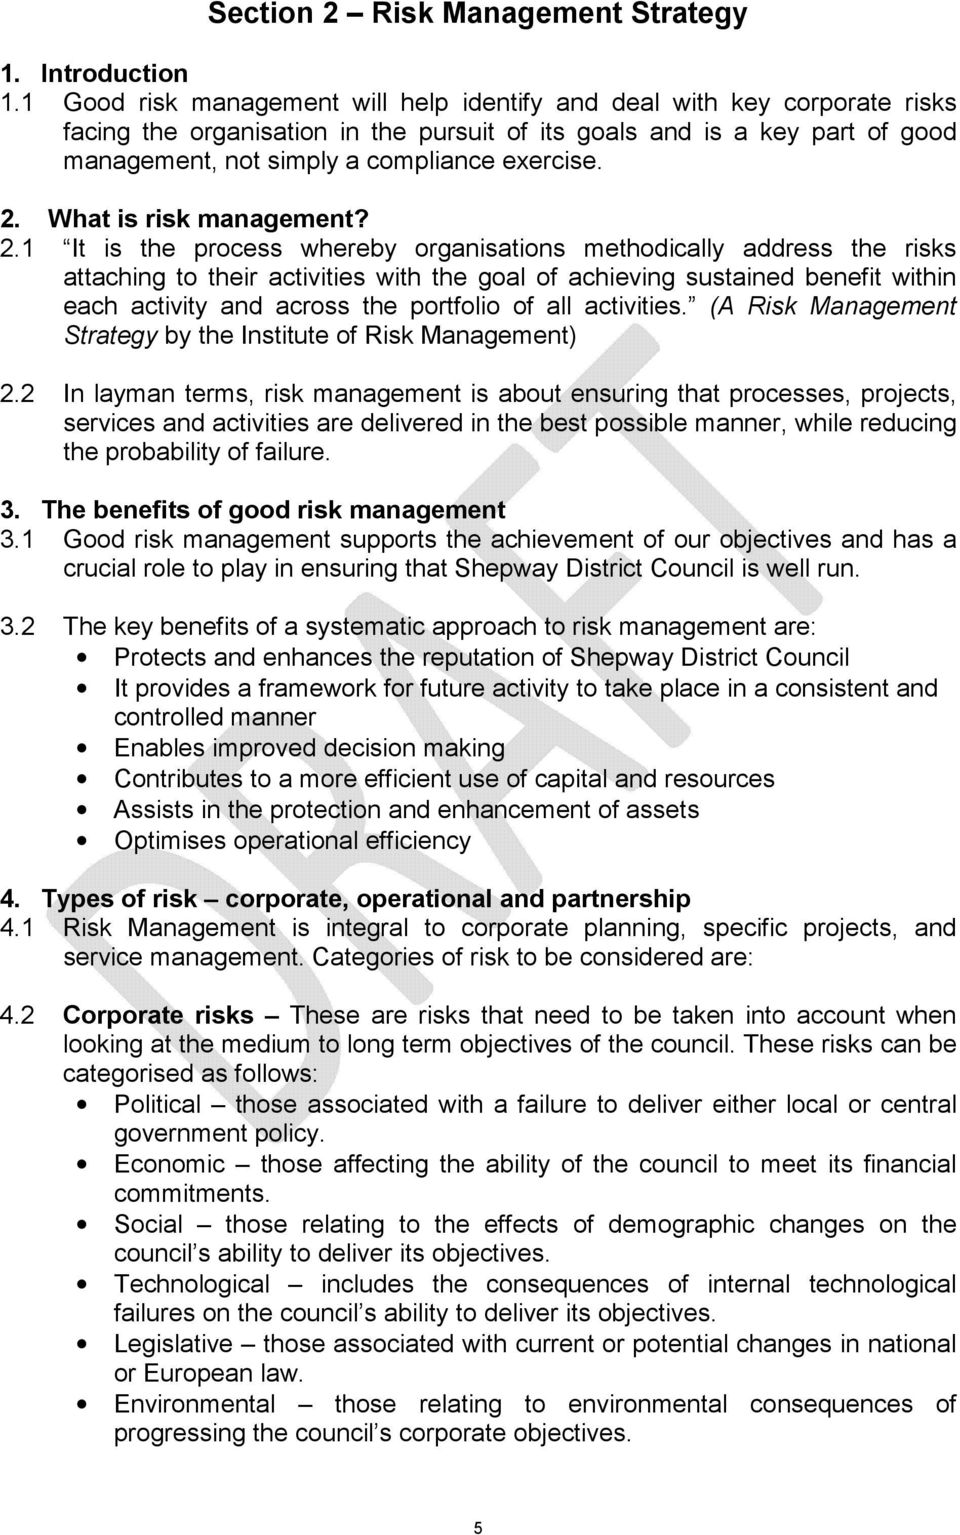 2. What is risk management? 2.